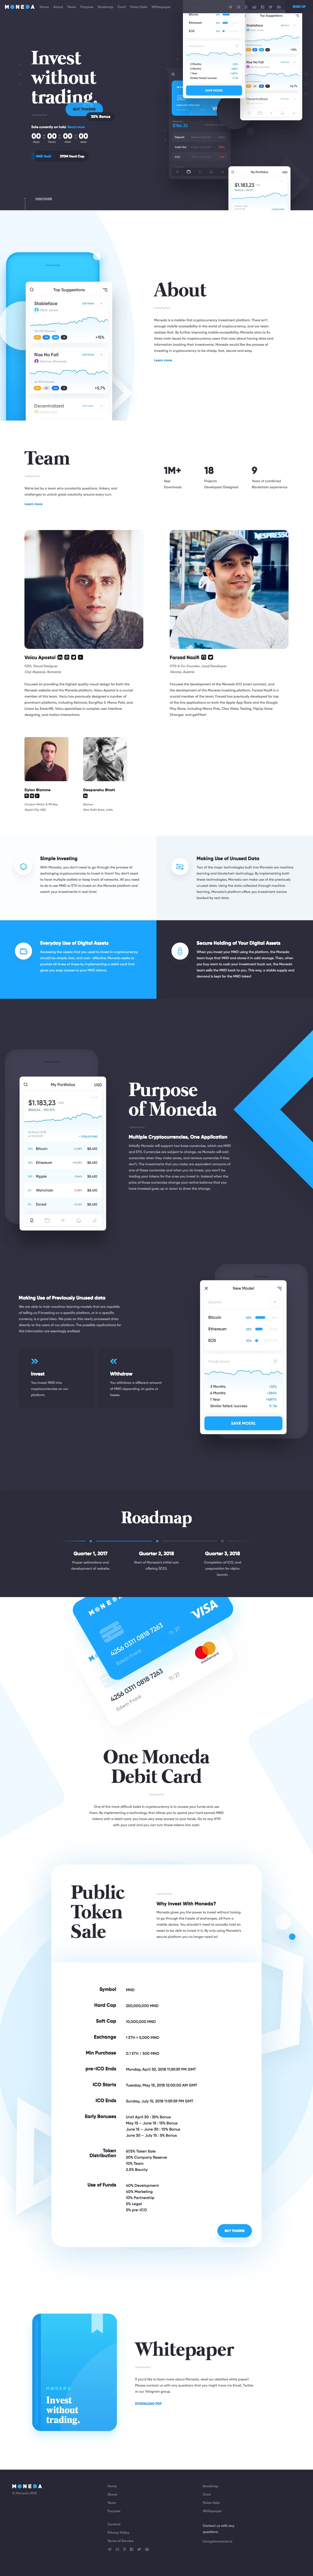 Moneda Landing Page Example: Moneda (MND) is a mobile-first cryptocurrency investment platform. By further improving mobile accessibility, Moneda aims to fix three main issues for cryptocurrency coin users that care about having data and information backing their investments. Moneda token would like the process to be cheap, fast, secure and easy.